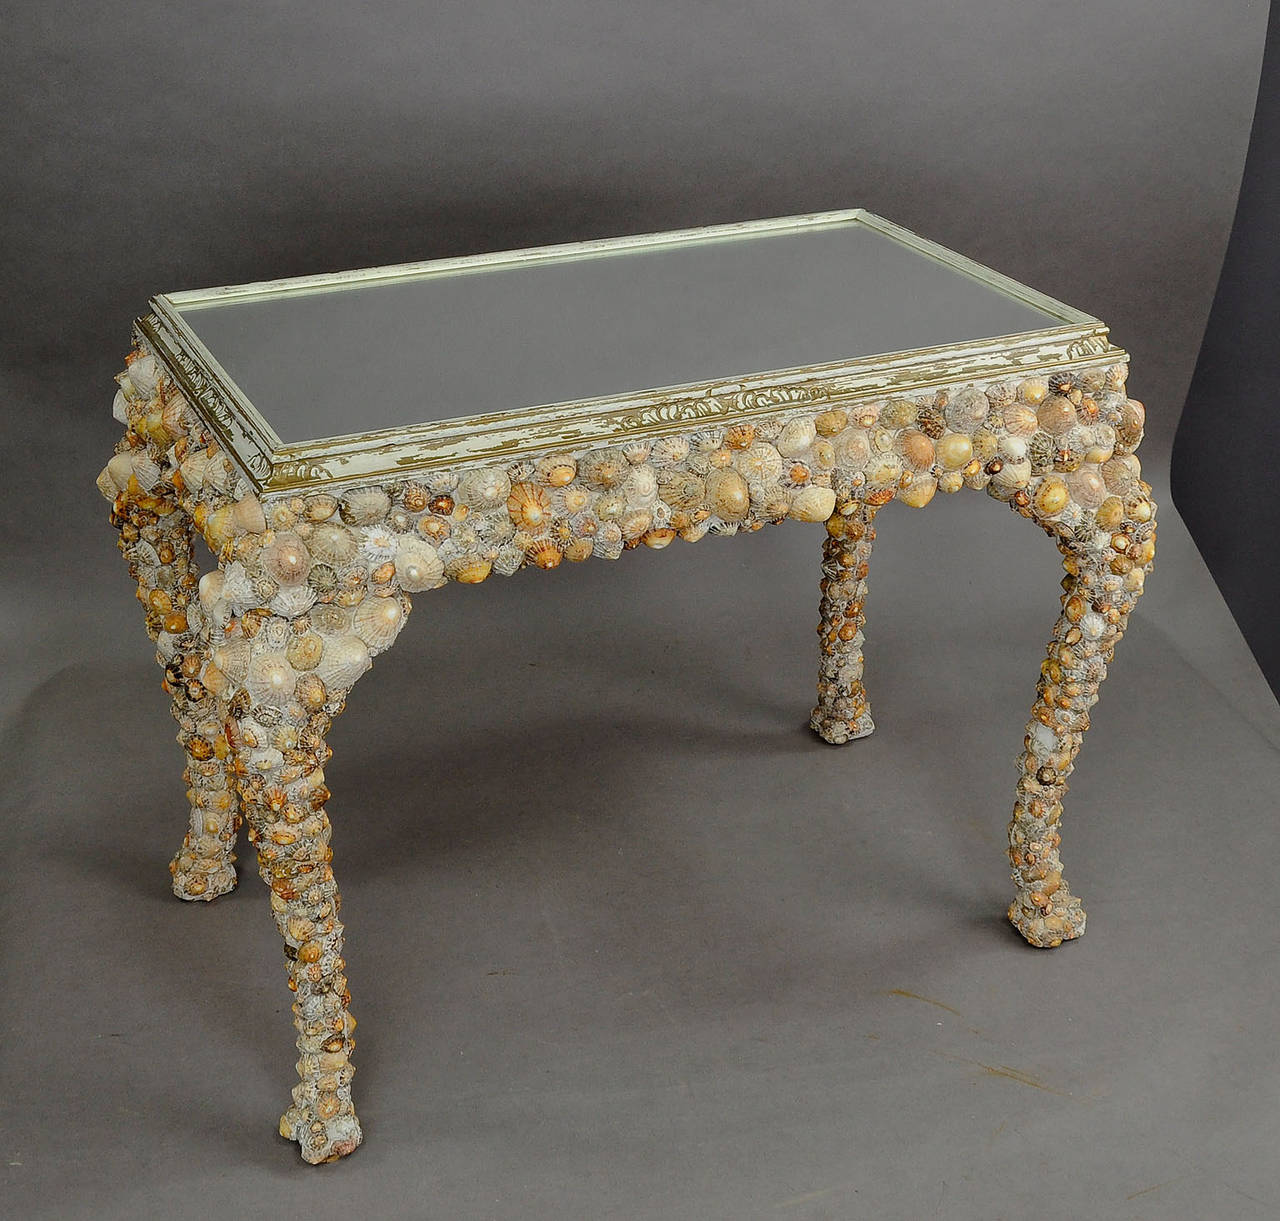 A wonderful coffee table from the 1940s. Made of wood and coated with an abundance of seashells. Wooden ornamented top frame with mirror inset.